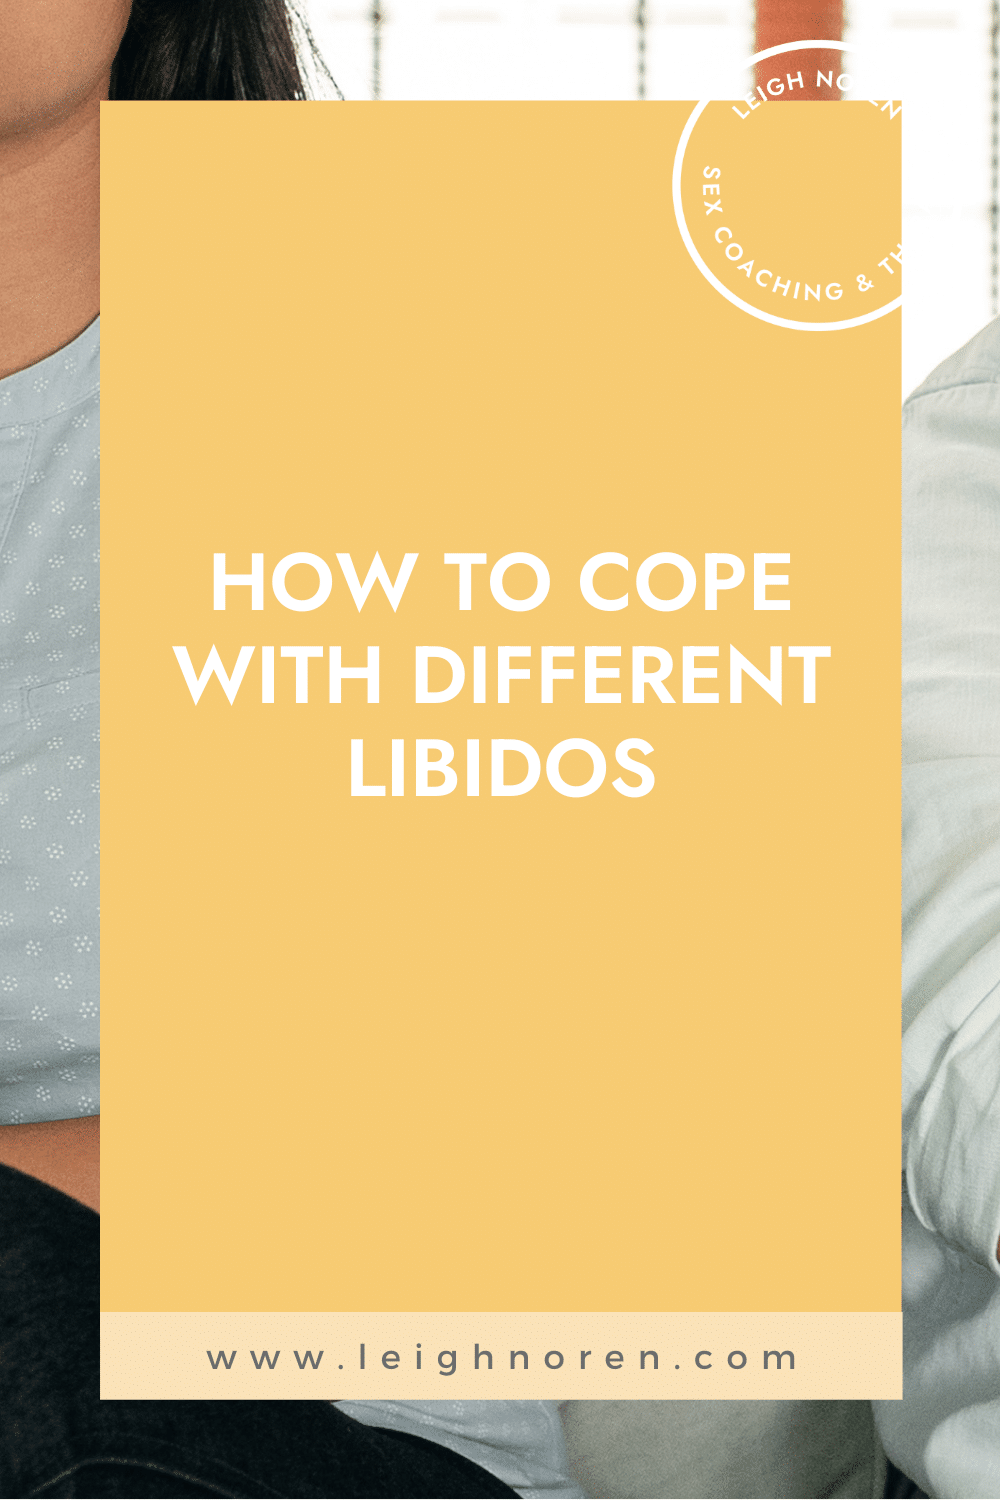 How to cope with different libidos